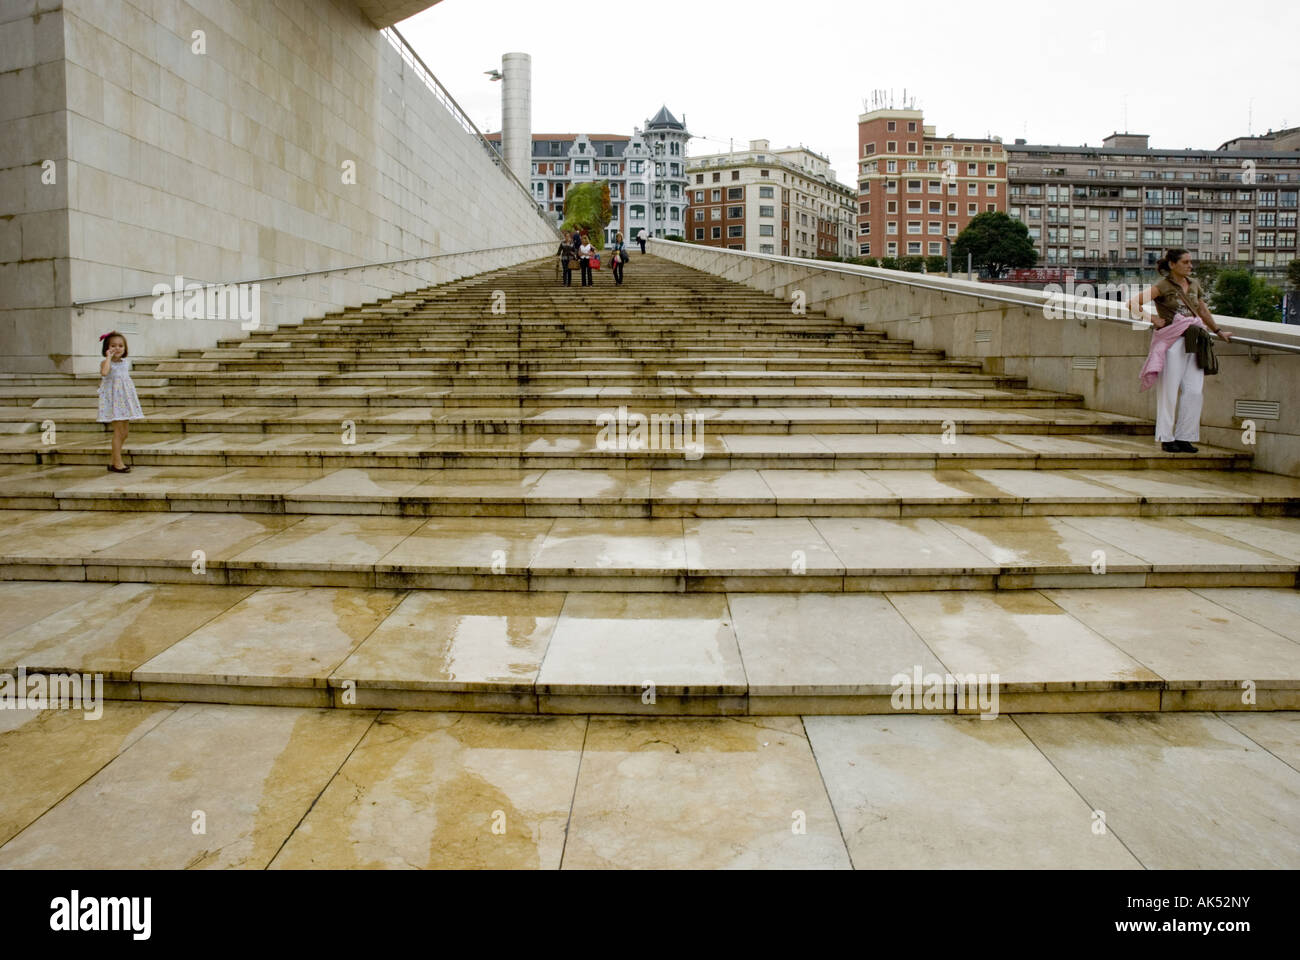 A family descends stairs outside the Guggenheim Museum in Bilbao, Spain. Stock Photo